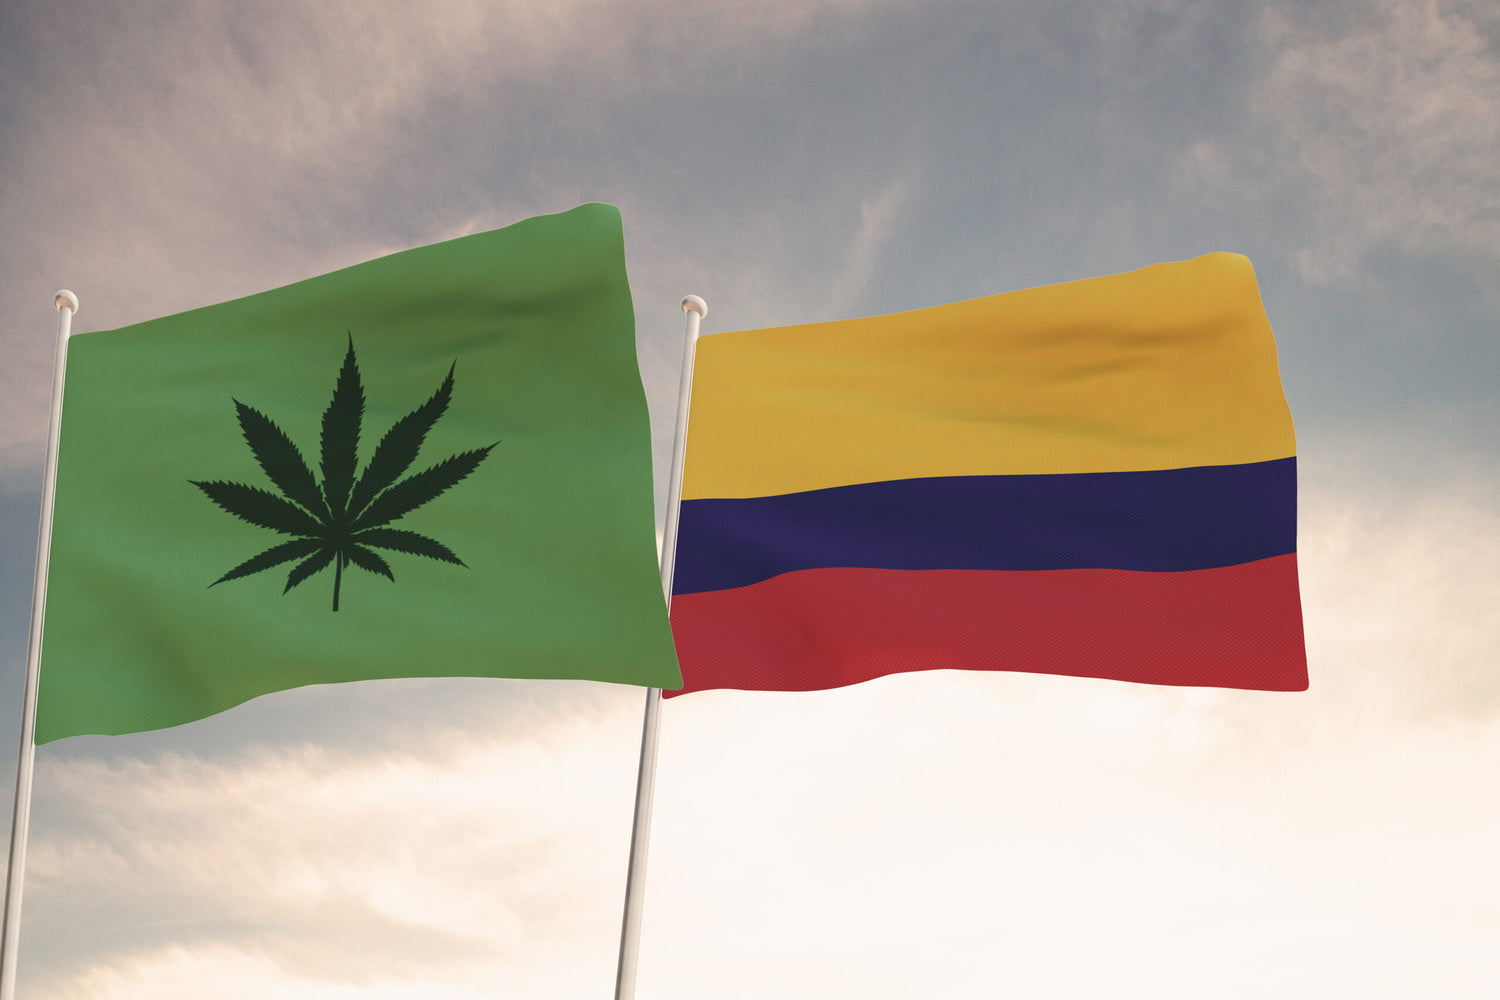 Colombia Poised For Entry Into Lucrative International Cannabis Markets